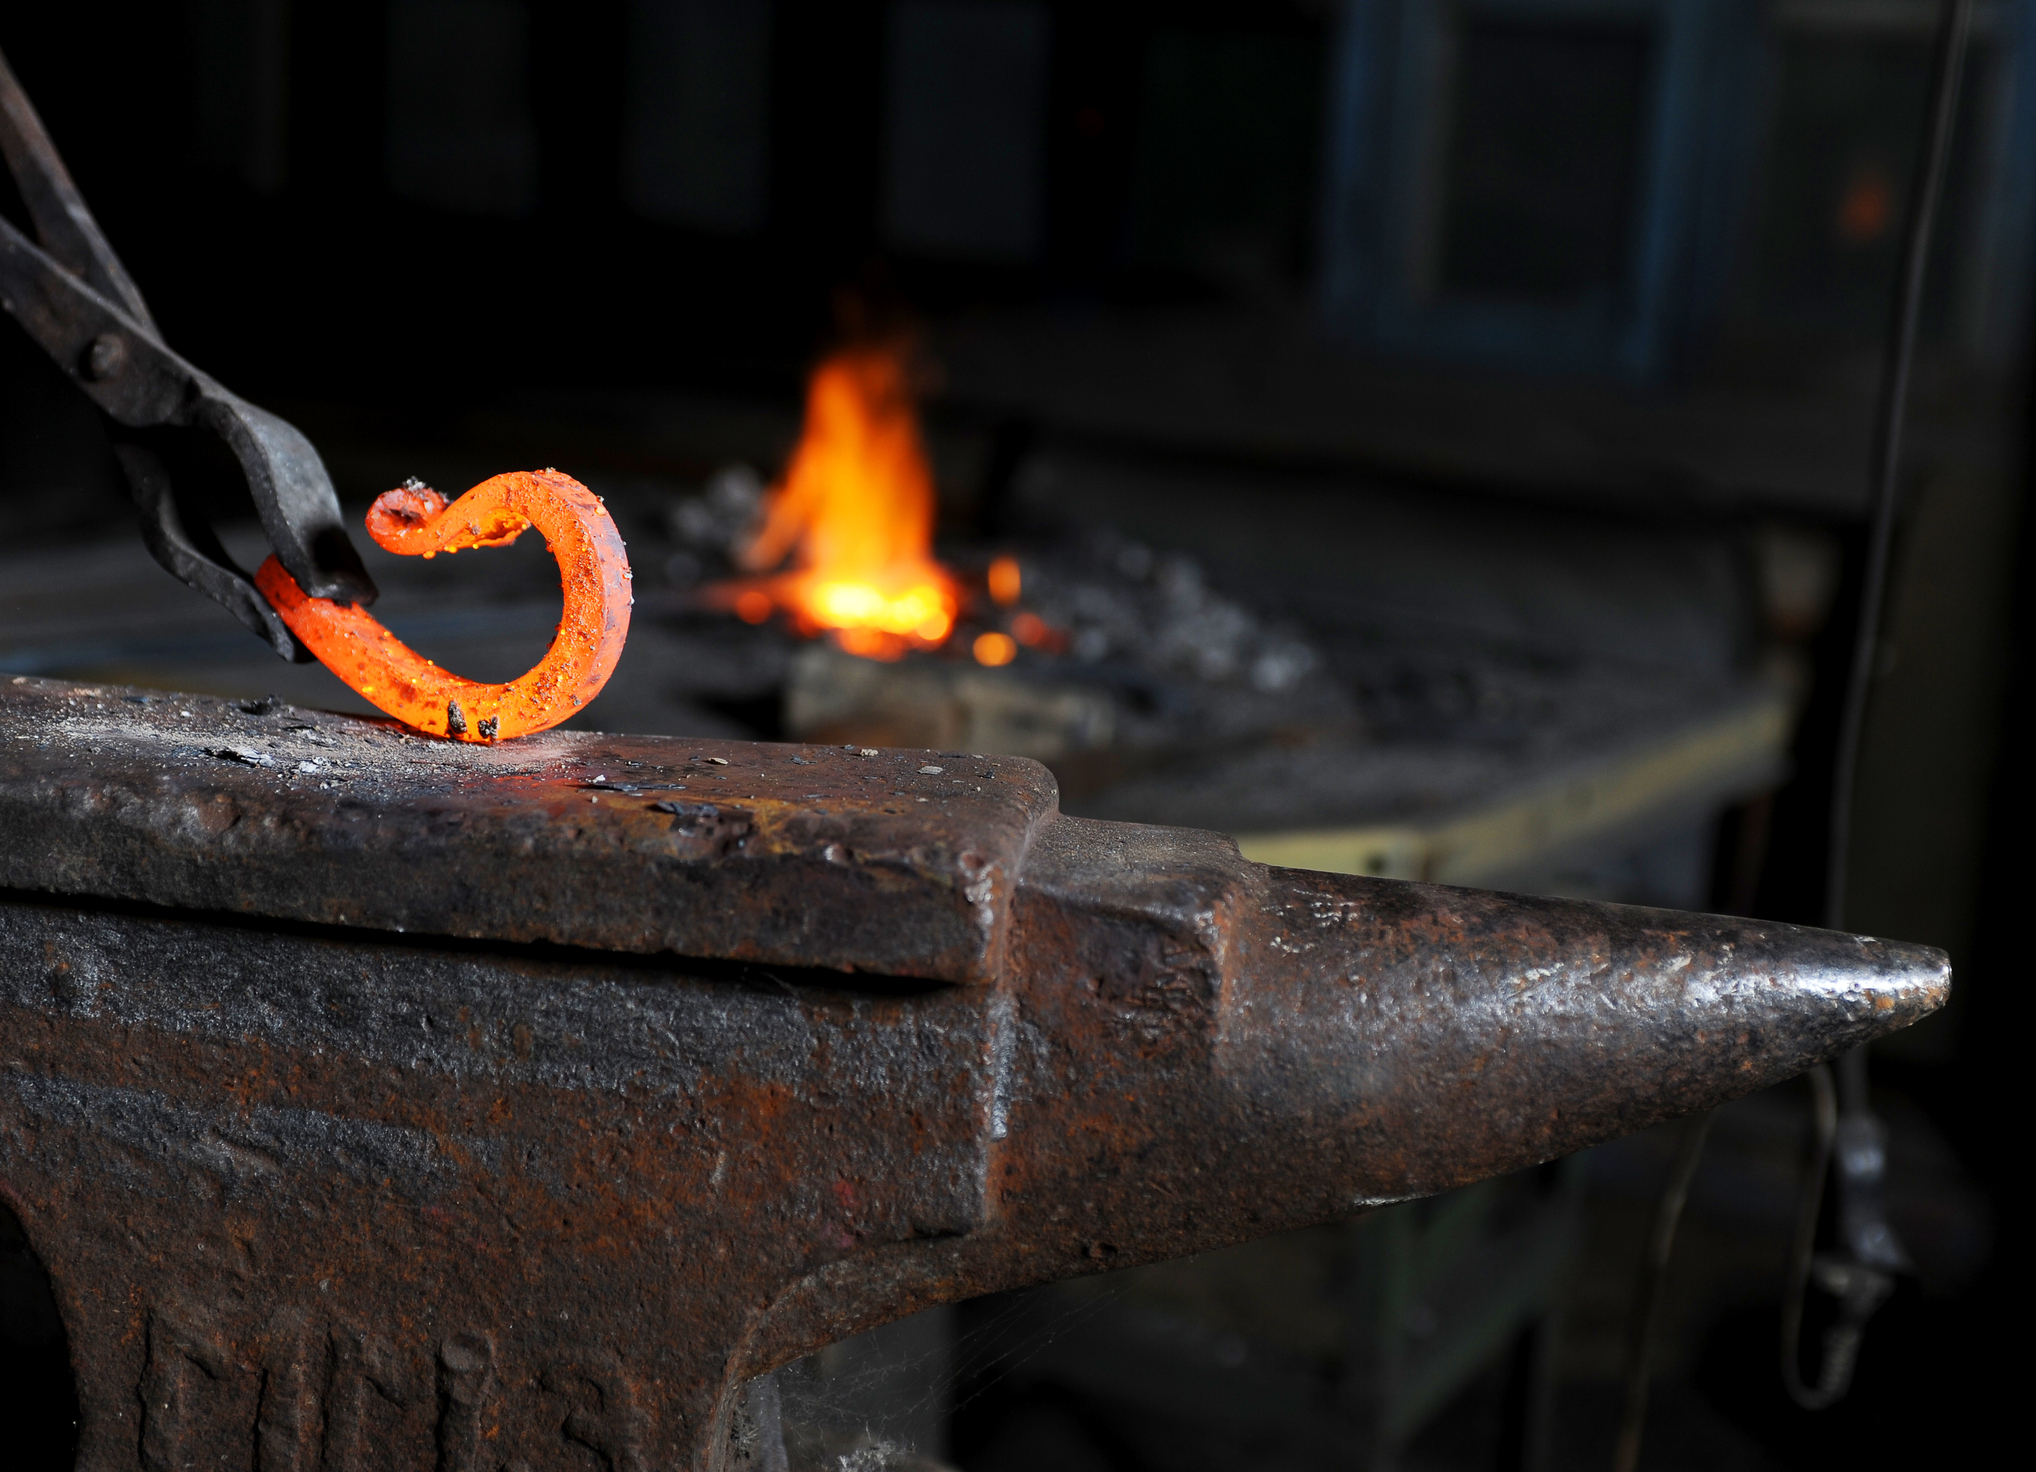 Two Gas Propane Forge Burners for Blacksmiths and Smelting by BURNCRAFT 